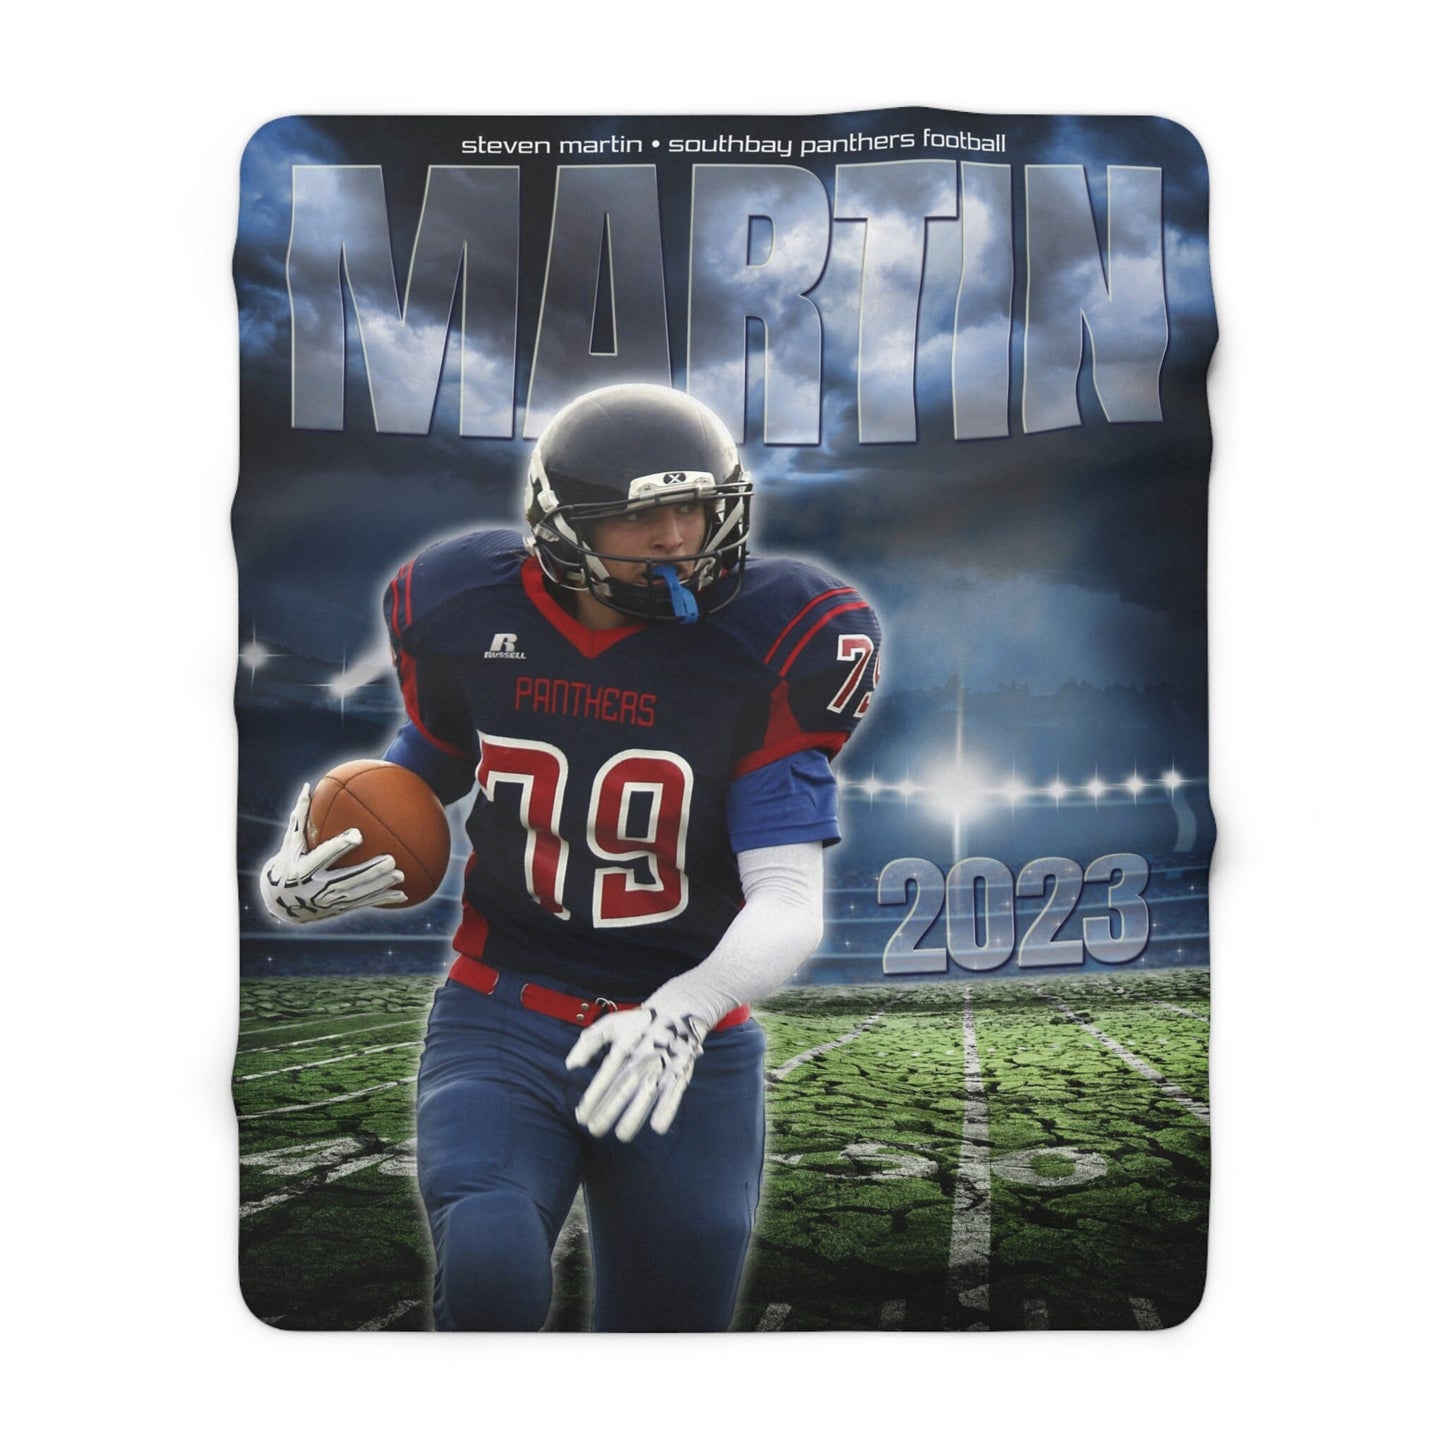 Personalized Football Sherpa Fleece Blanket Great for Game Day Senior Gift for Mom Dad Sister Brother Aunt Nana Grandma High School College